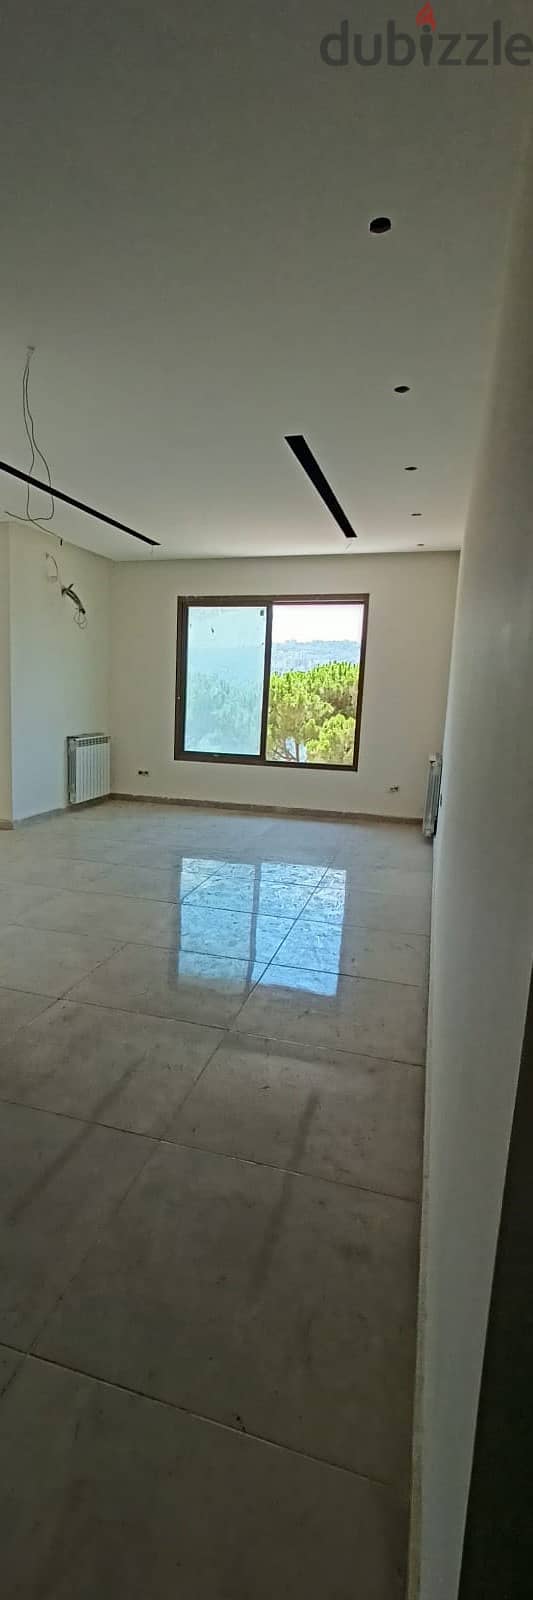 Monteverde Prime (180Sq) With Payment Facilities and View , (MO-126) 4